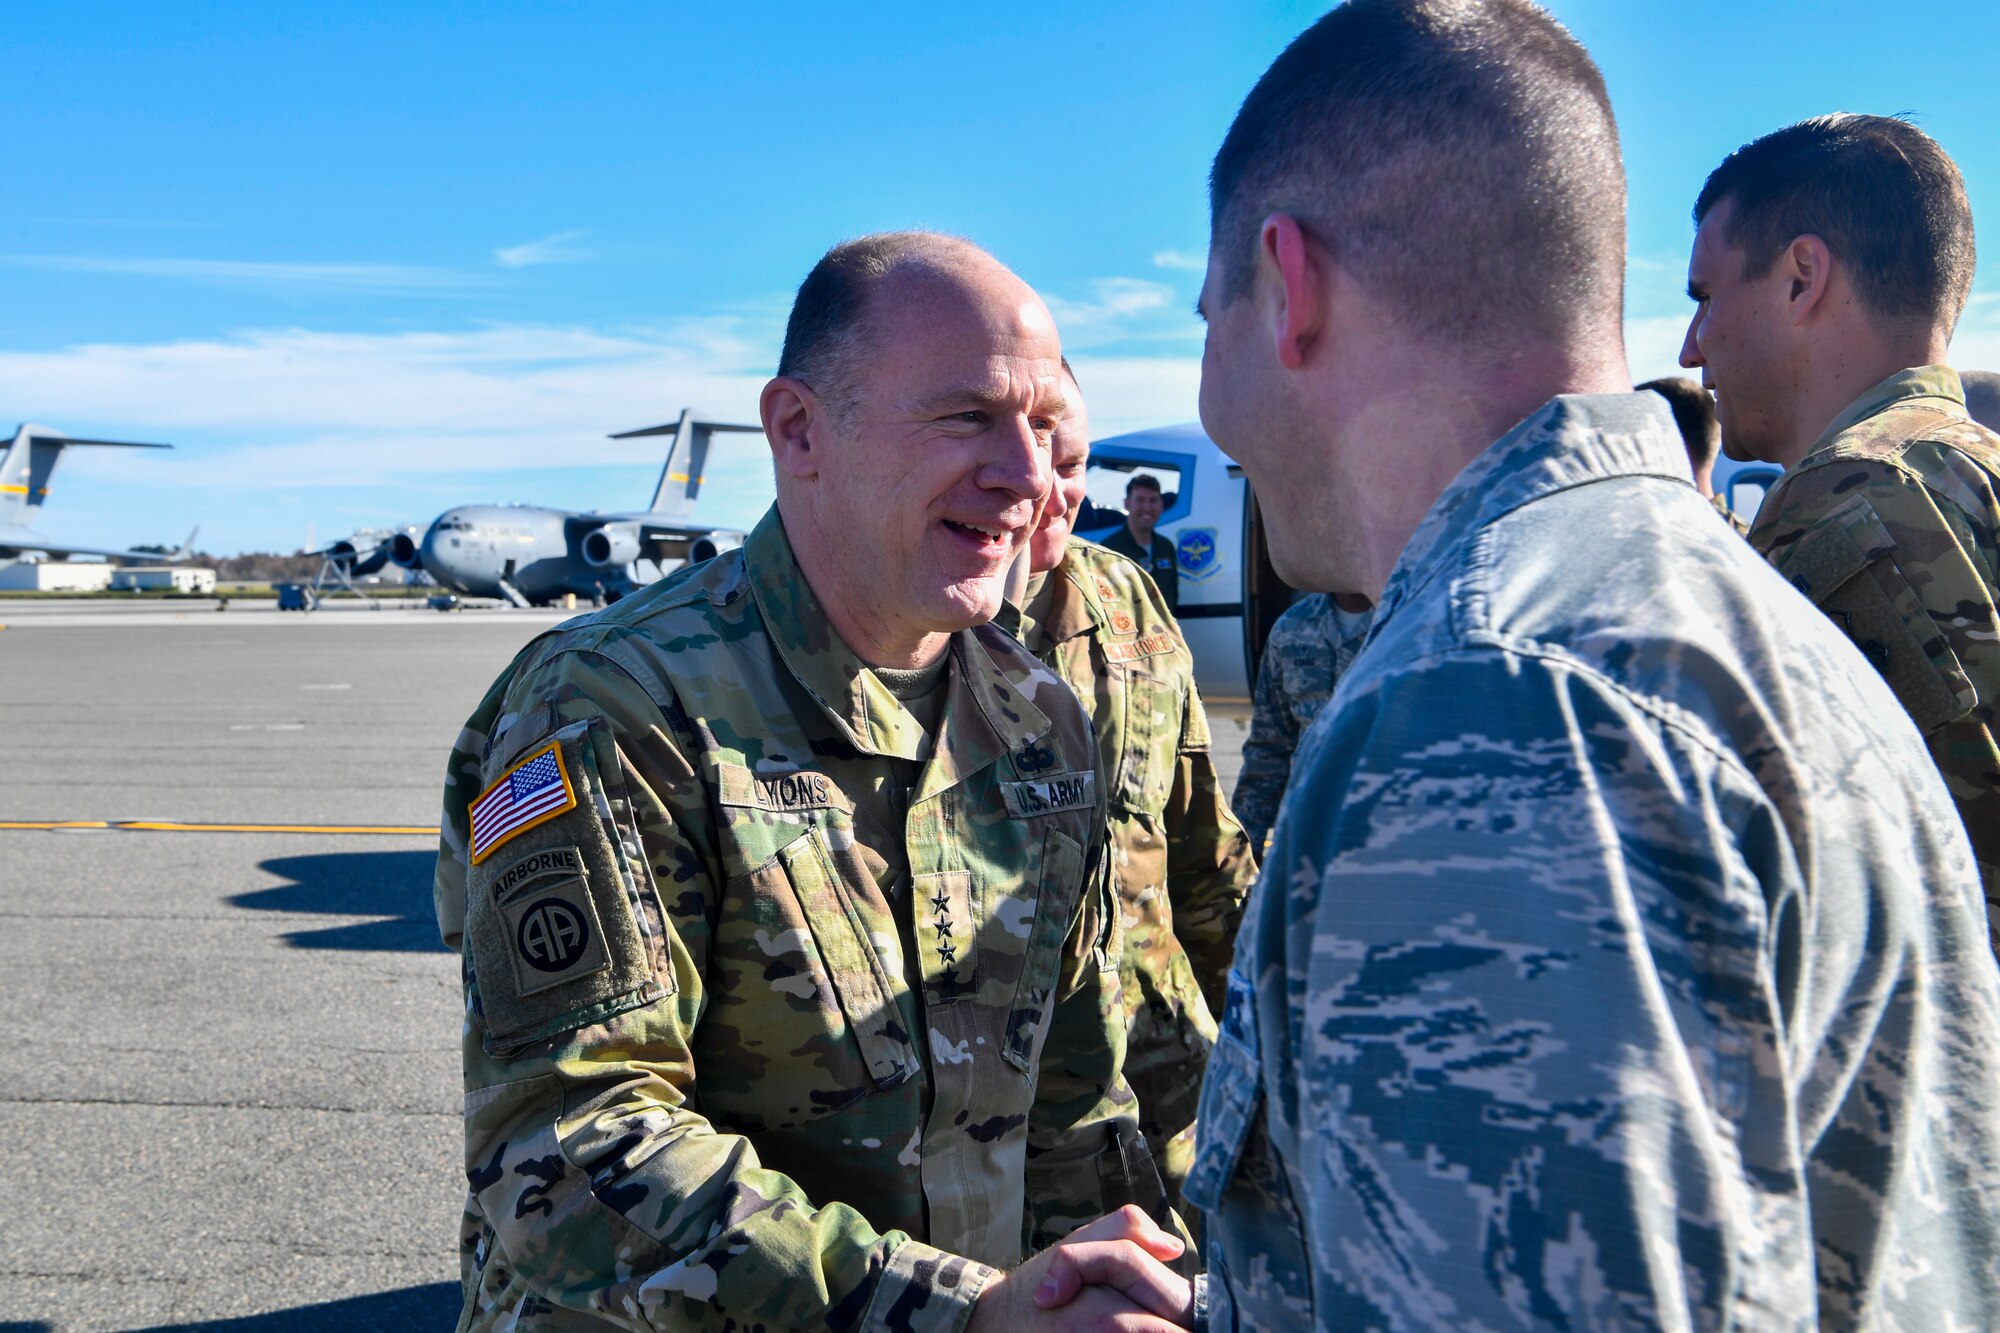 Army Gen. Stephen Lyons, commander of U.S. Transportation Command, greets Air Force Capt. Shawn Cameron, 628th Logistics Readiness Squadron operations officer and lead coordinator for the visit, upon arriving at Joint Base Charleston, S.C., Dec. 6, 2018.